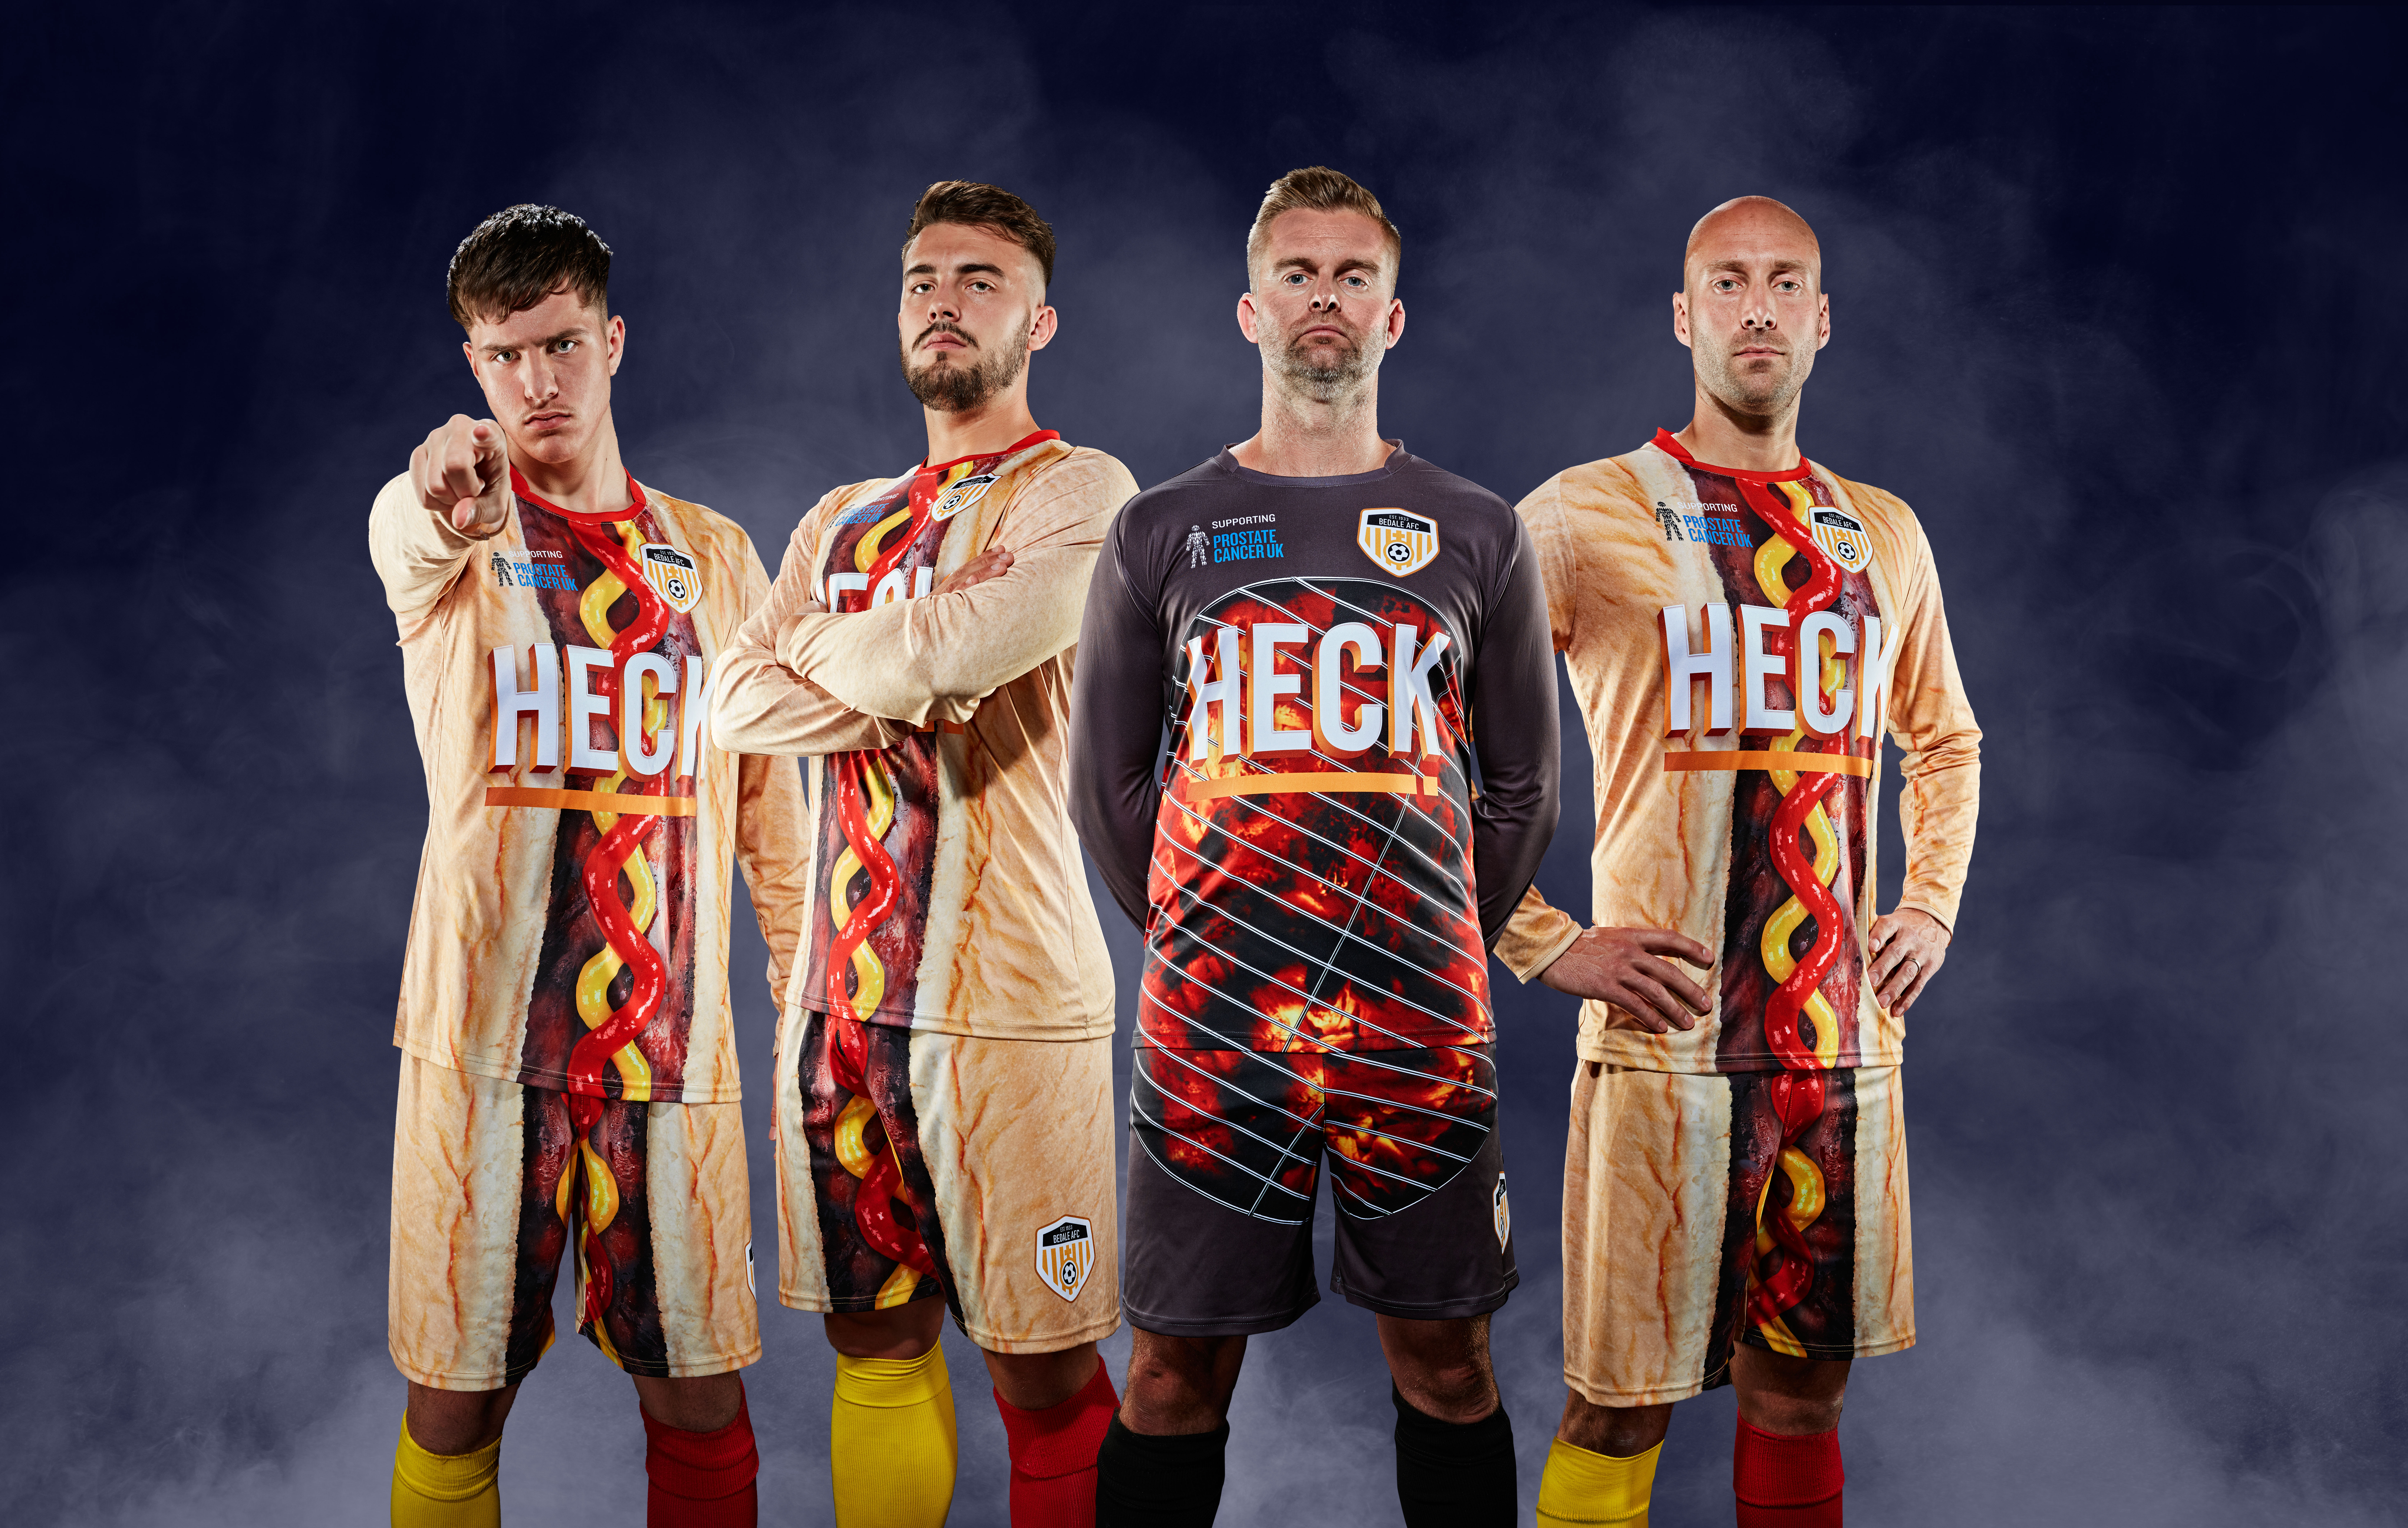 Hot dog sausages featured on Bedale's kit last season 